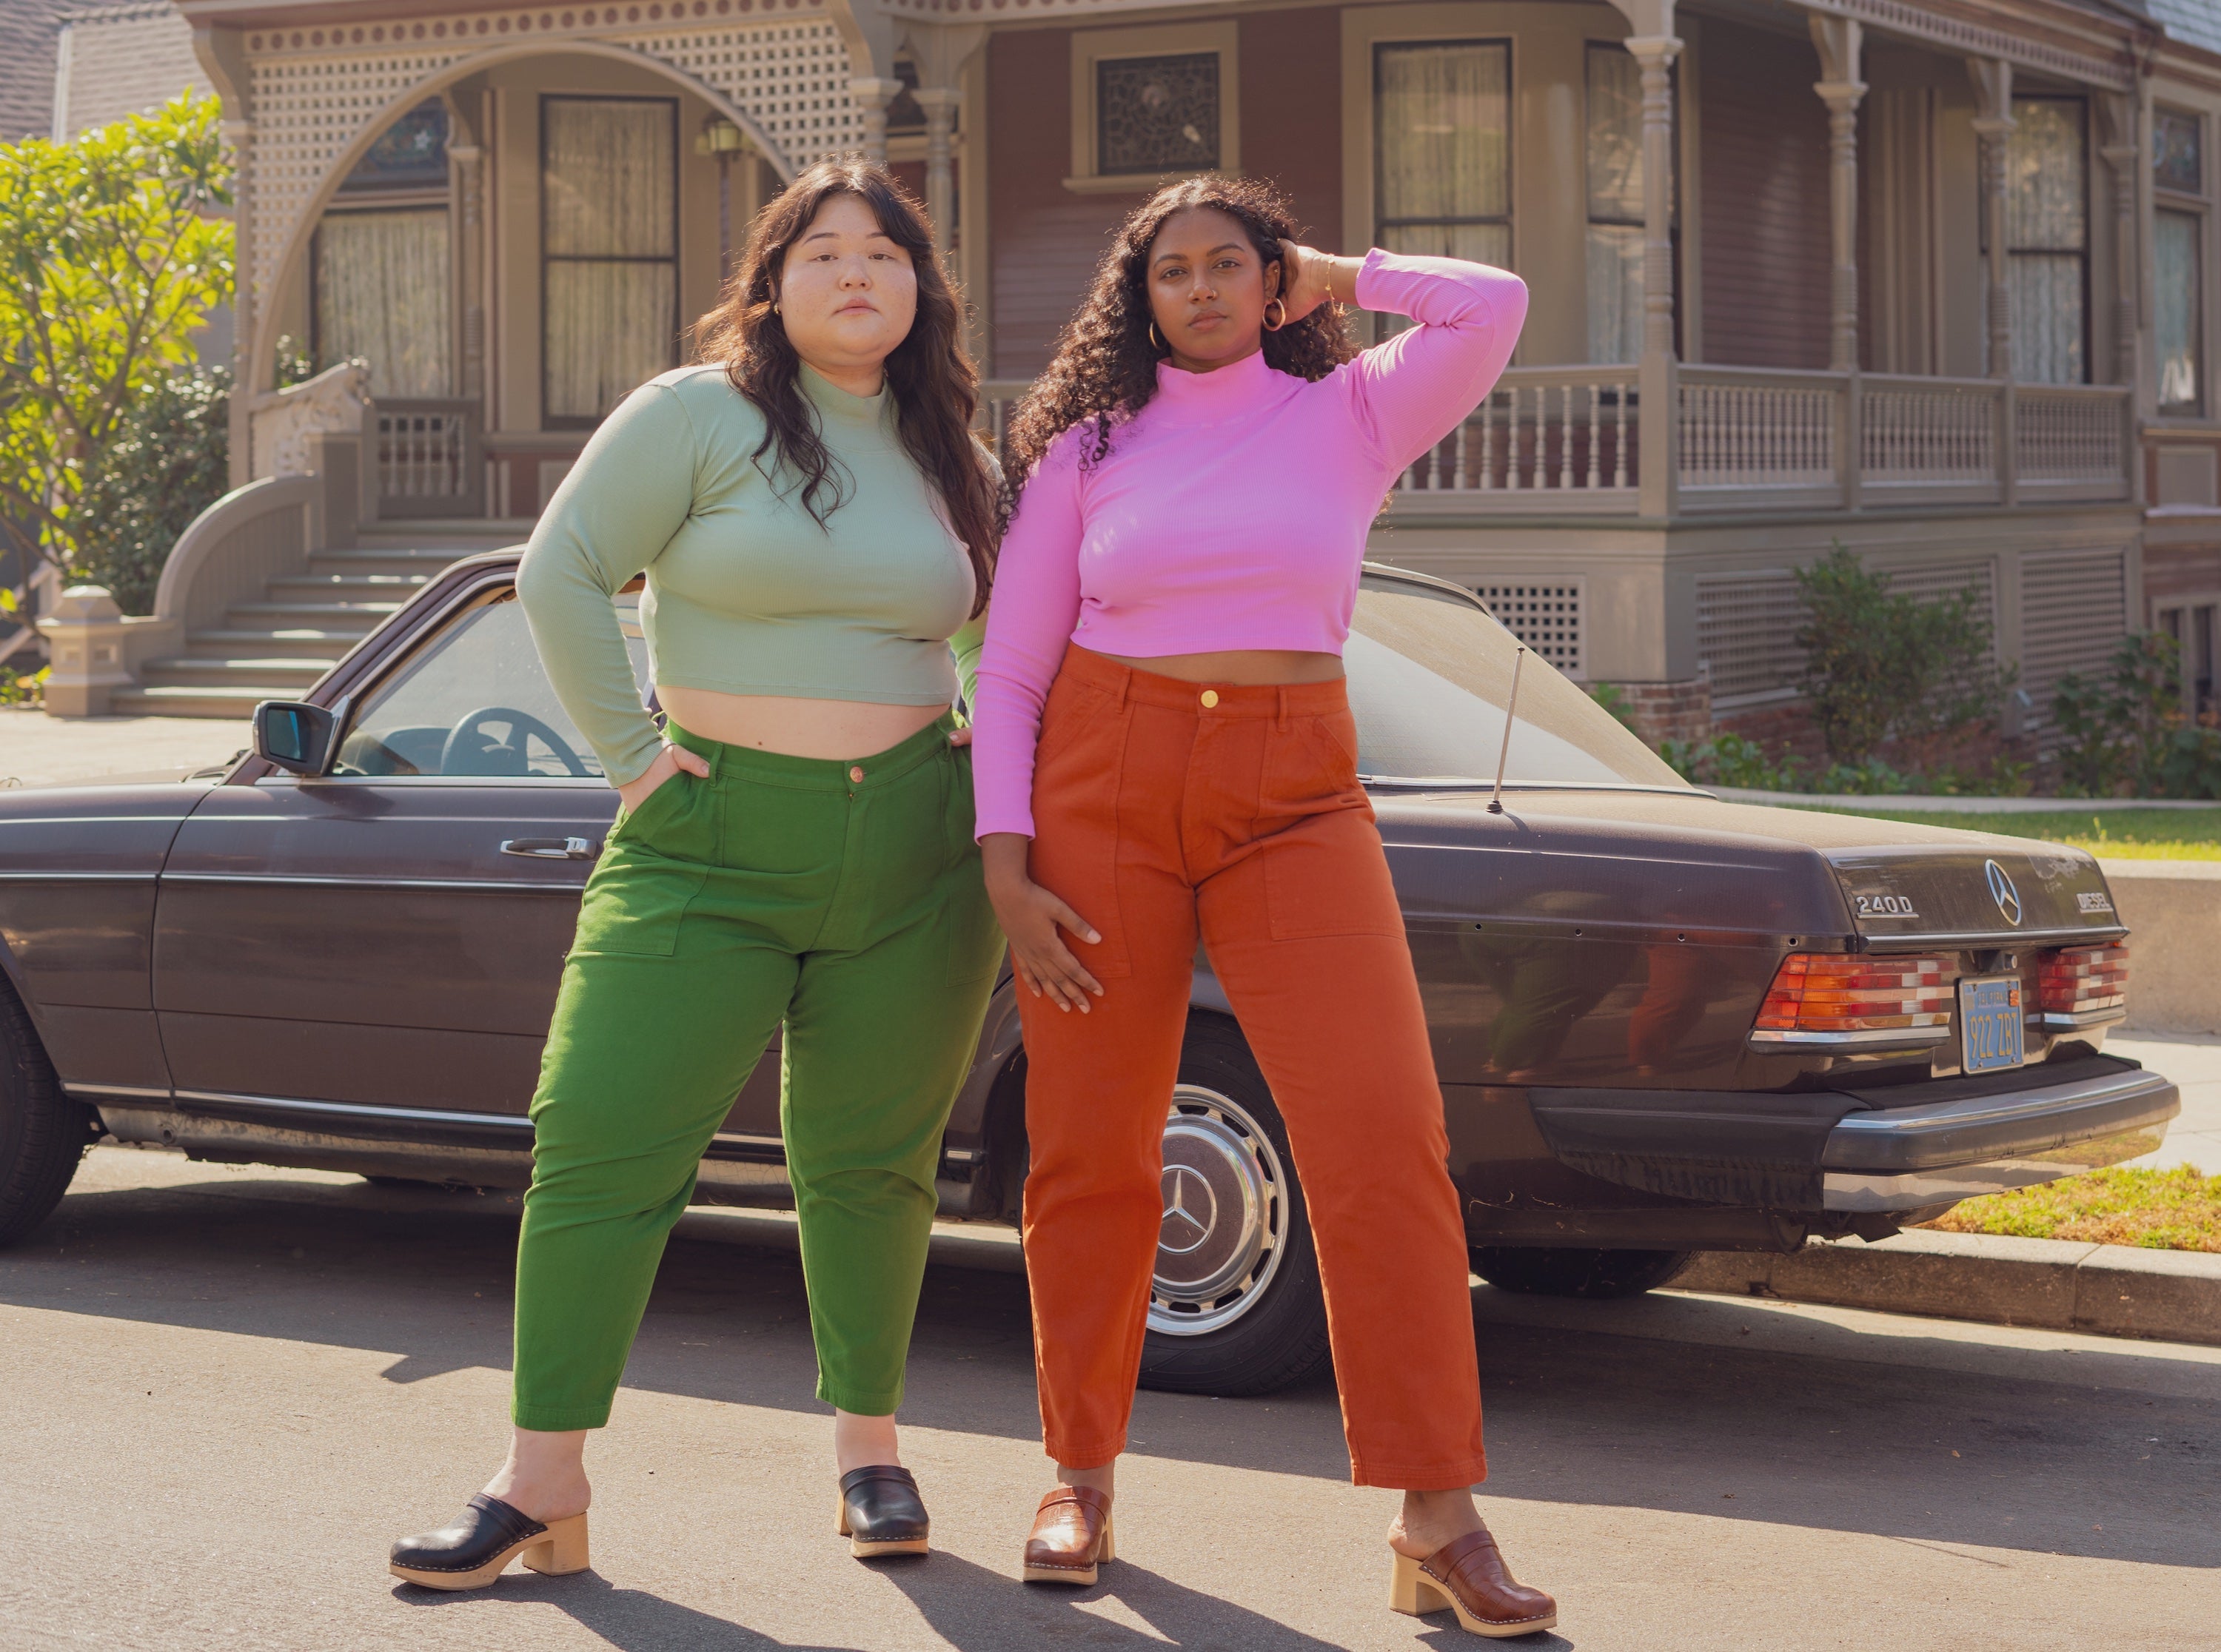 Ashley is wearing Essential Turtleneck in Sage and Petite Pencil Pants in Lawn Green. Meghna is wearing Essential Turtleneck in Bubblegum Pink and Pencil Pants in Burnt Terracotta